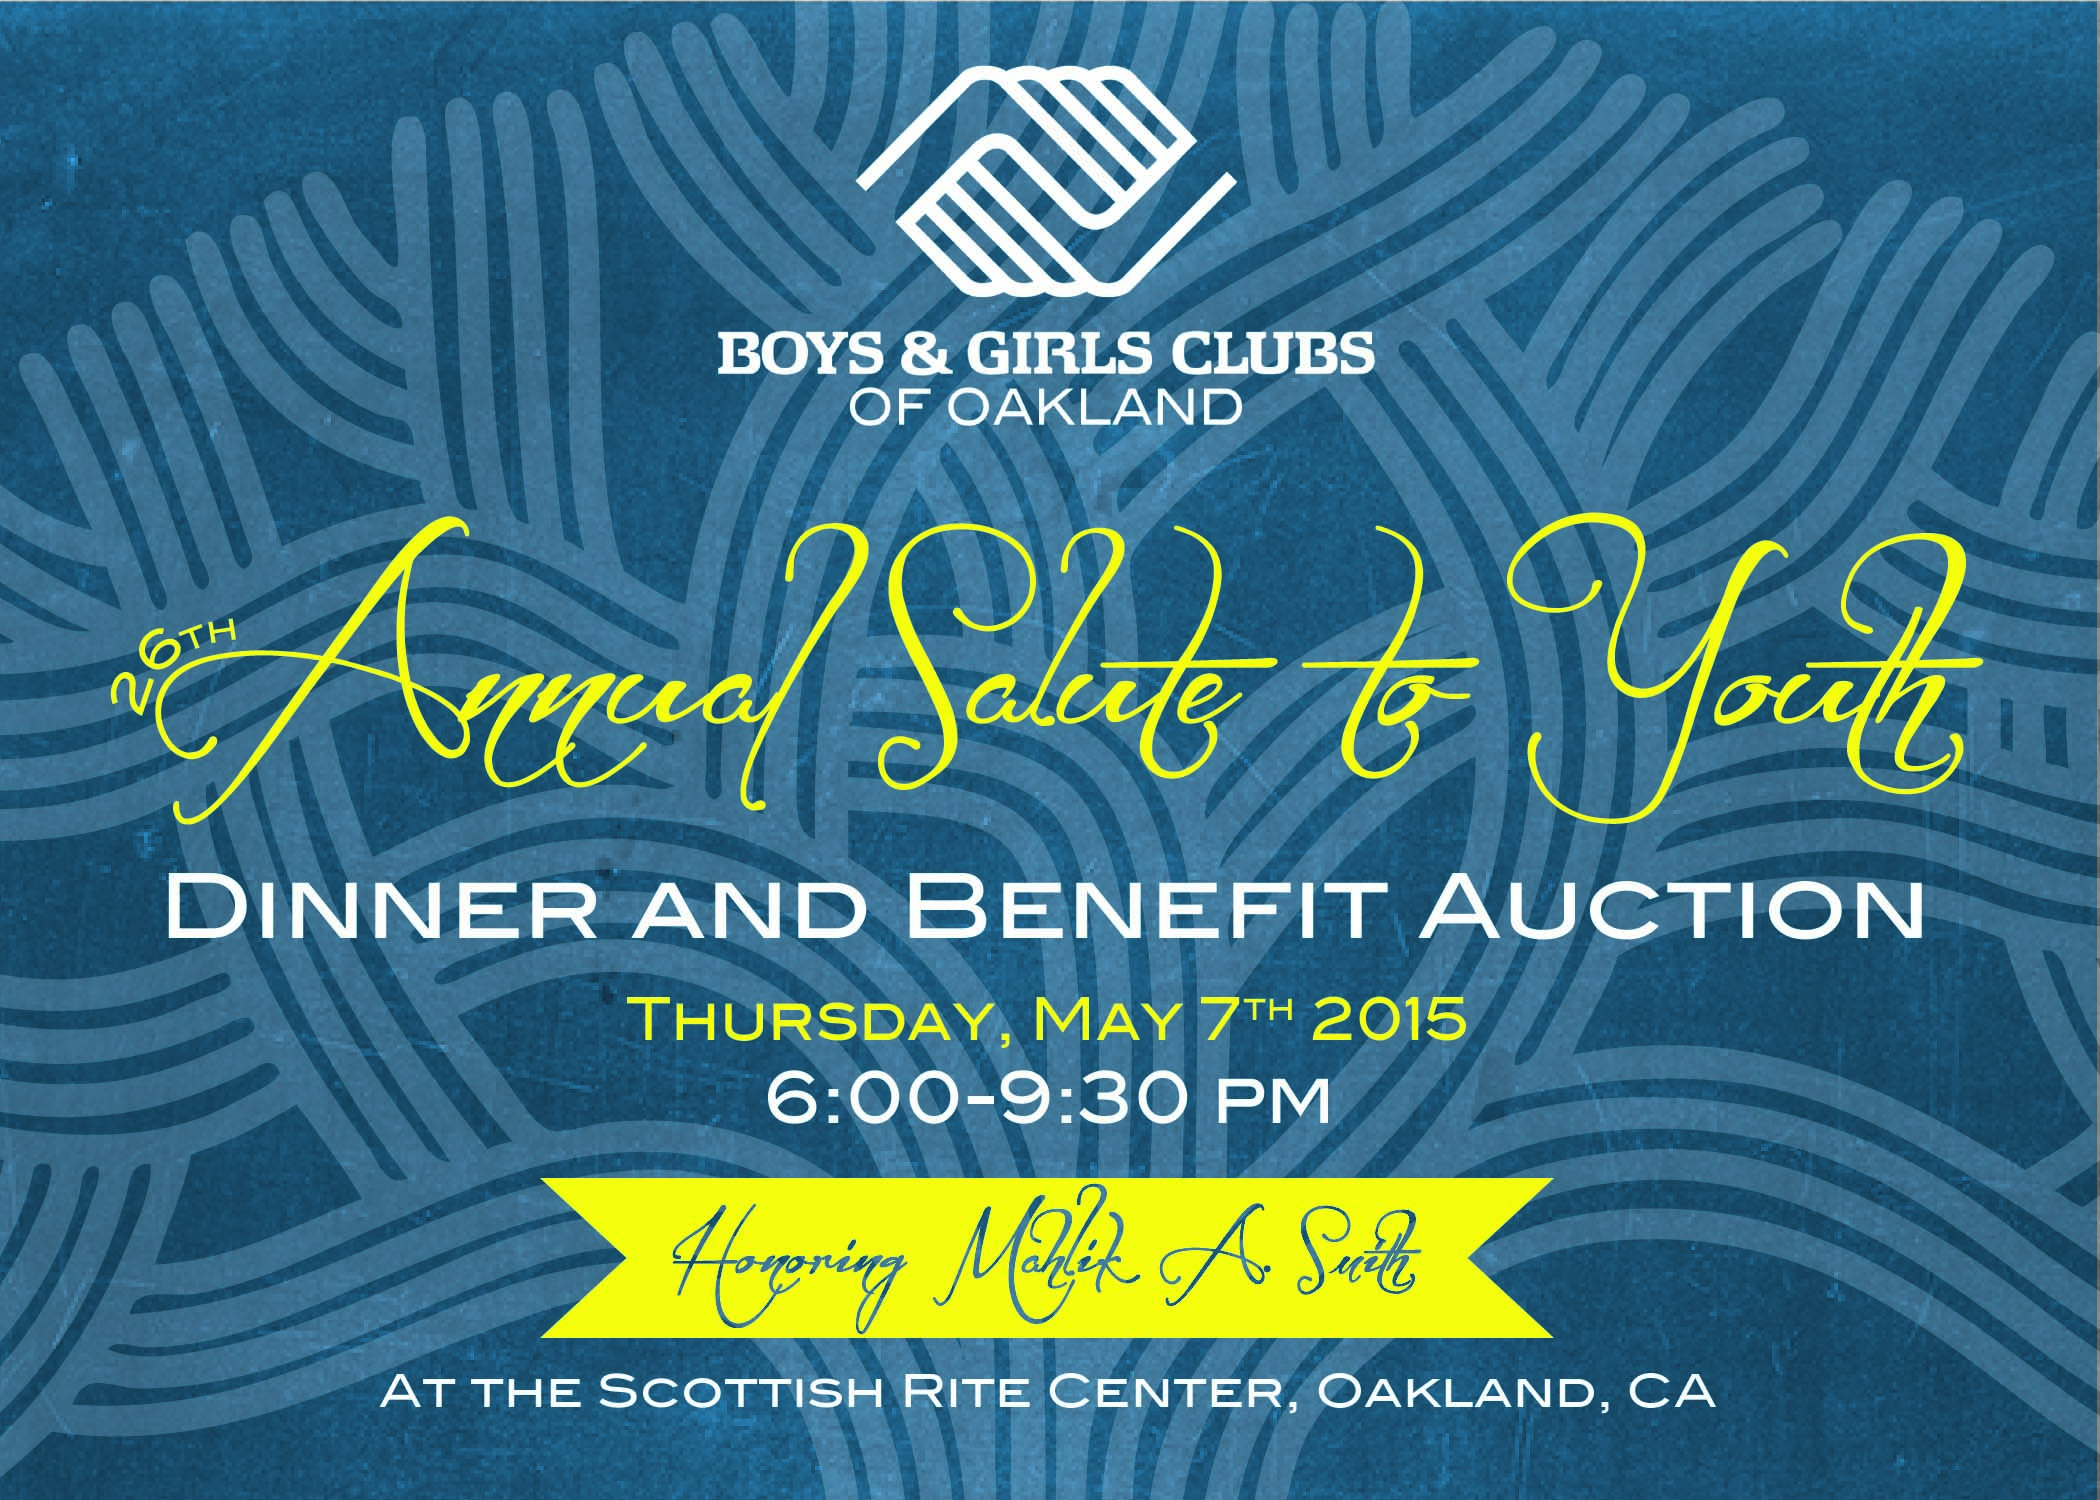 Boys & Girls Clubs of Oakland Annual Gala and Benefit